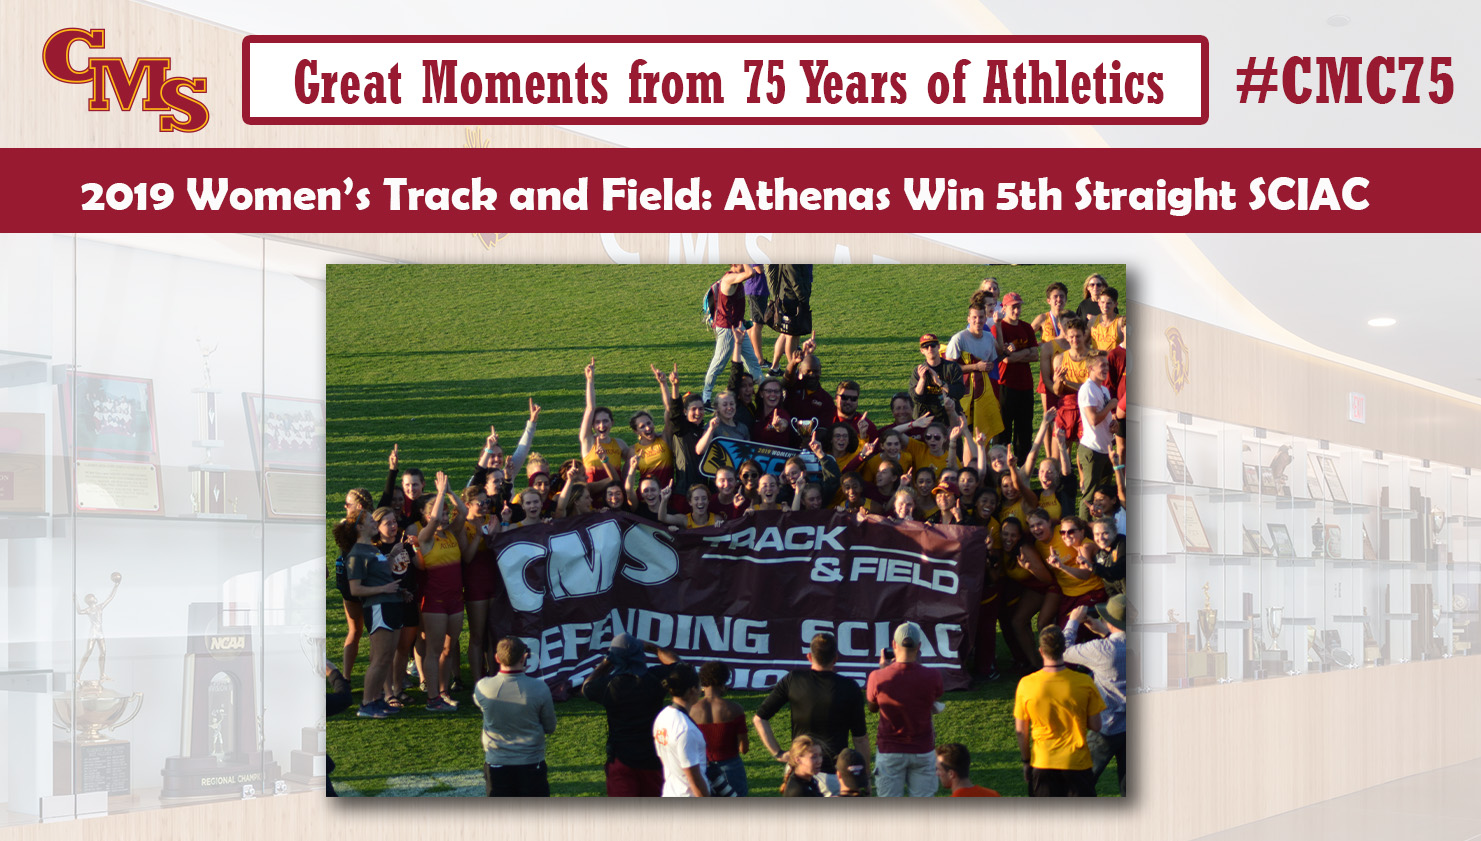 The CMS women's track and field team celebrating its 2019 SCIAC title. Words over the photo read: Great Moments from 75 Years of Athletics. 2019 Women's Track and Field: Athenas Win 5th Straight SCIAC